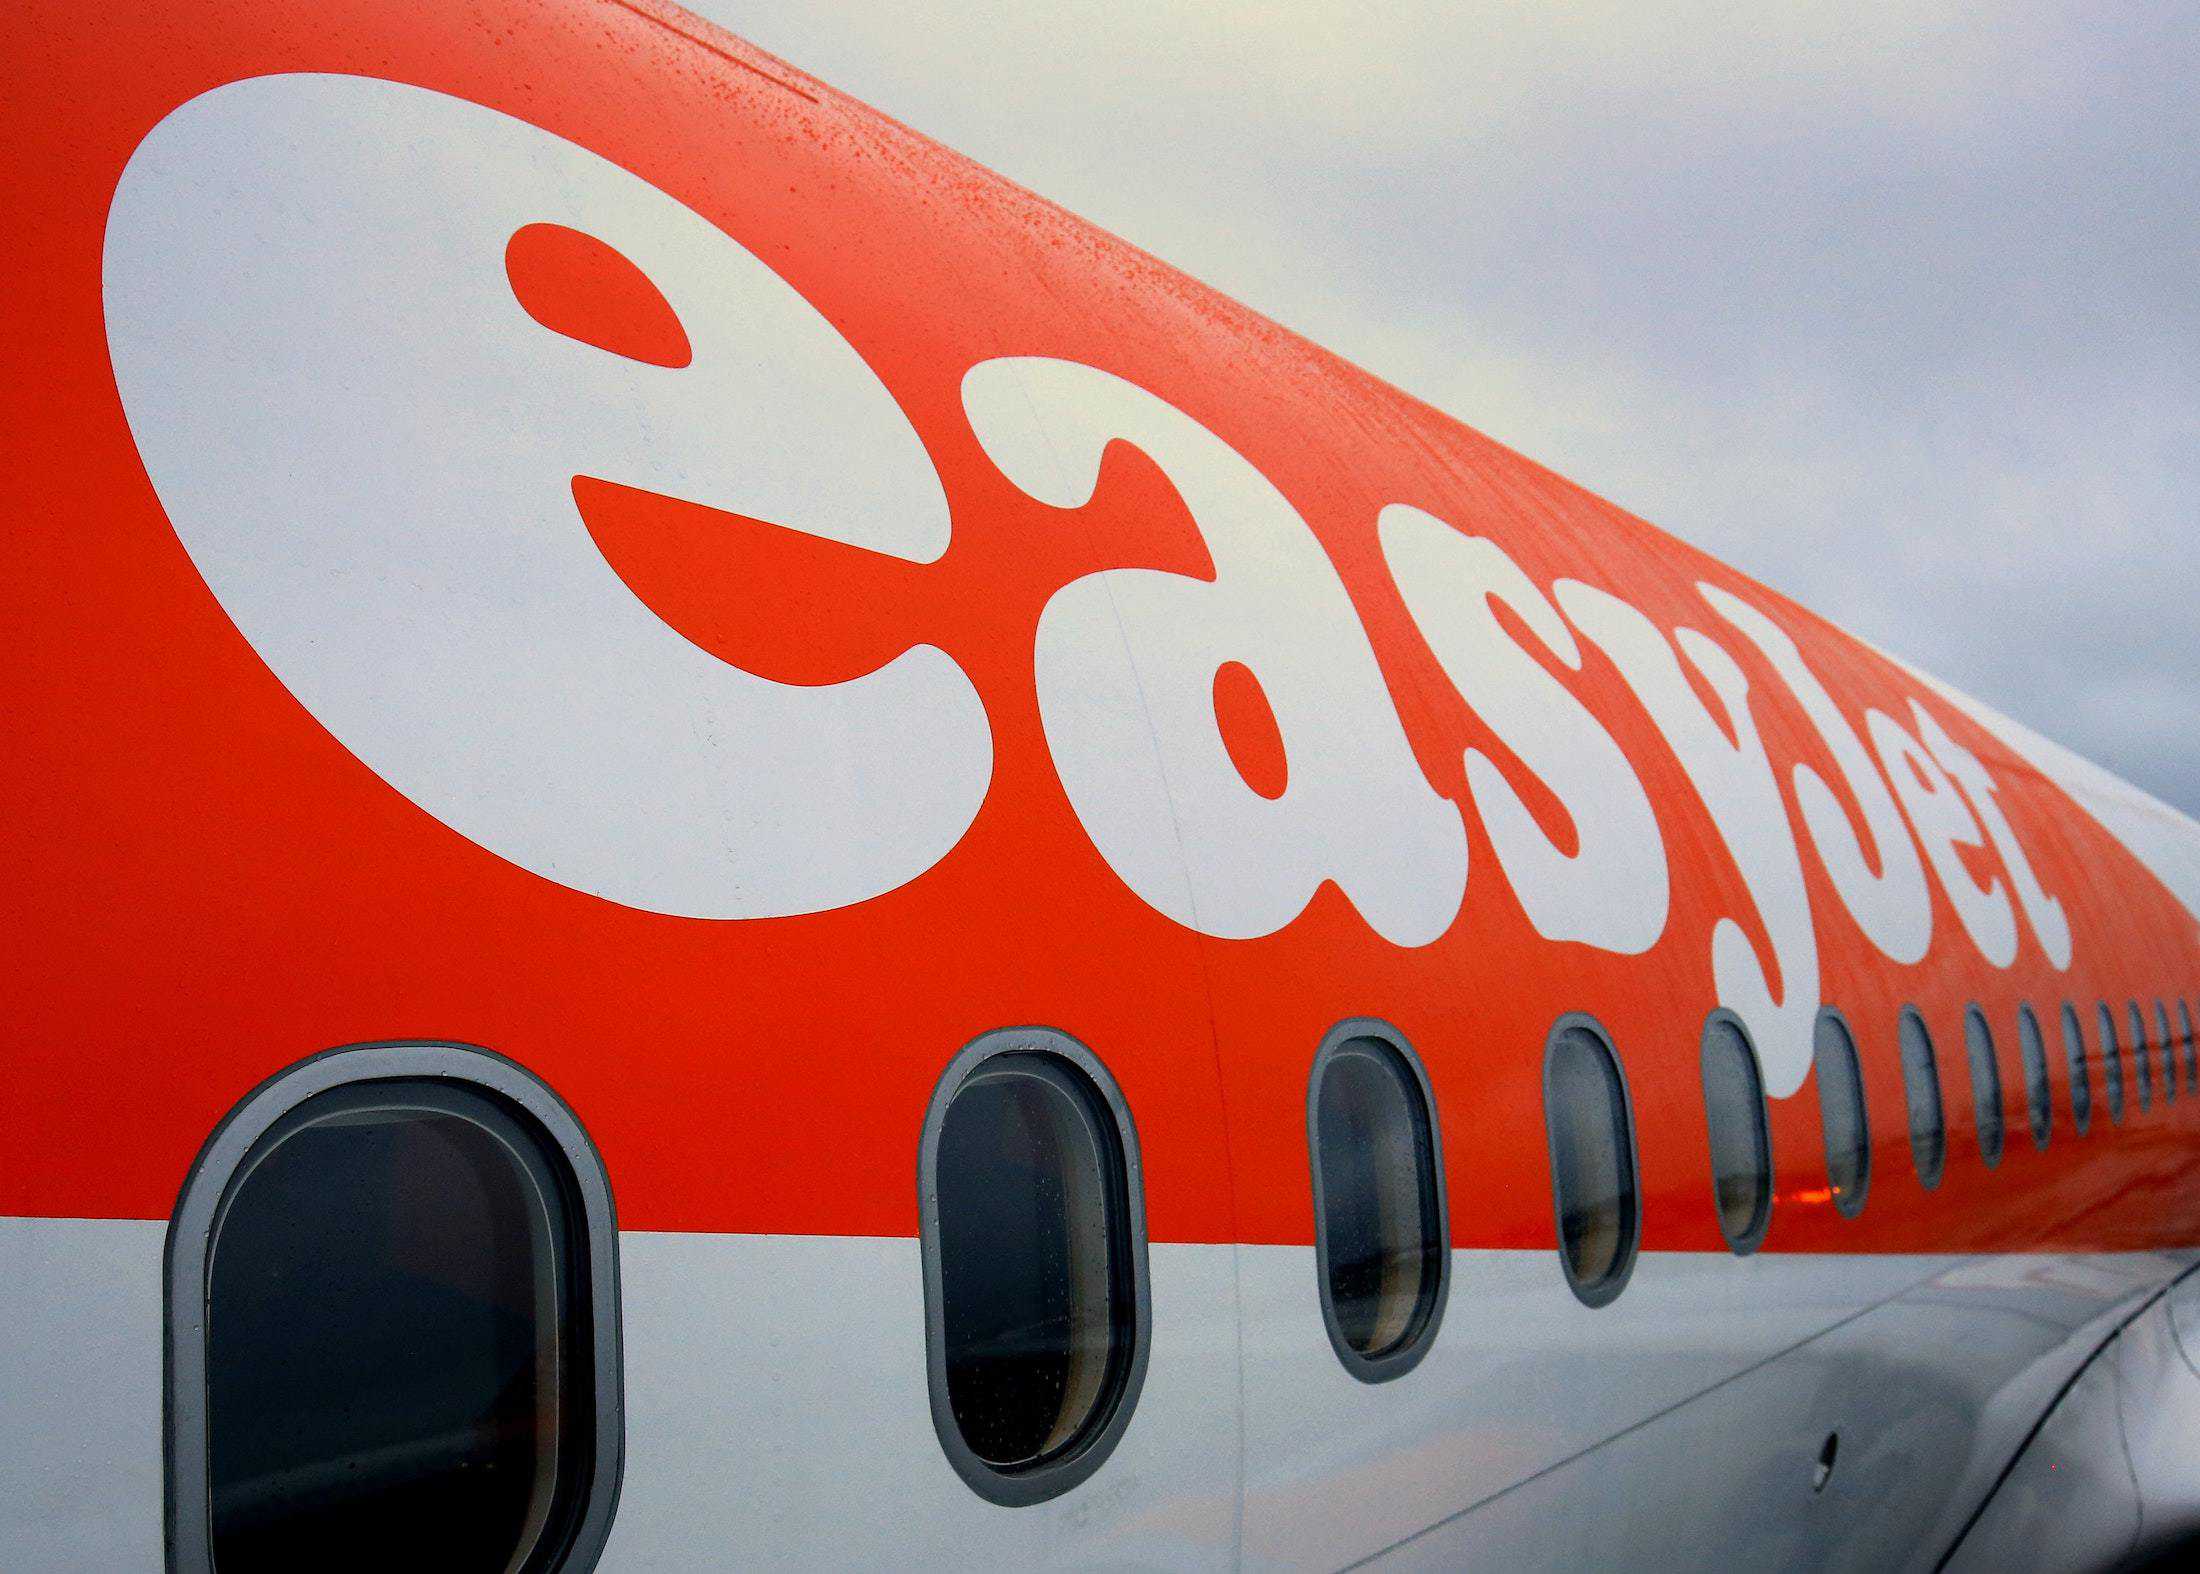 Video – Woman kicked off easyJet plane after ‘refusing to wear mask and ranting at crew’